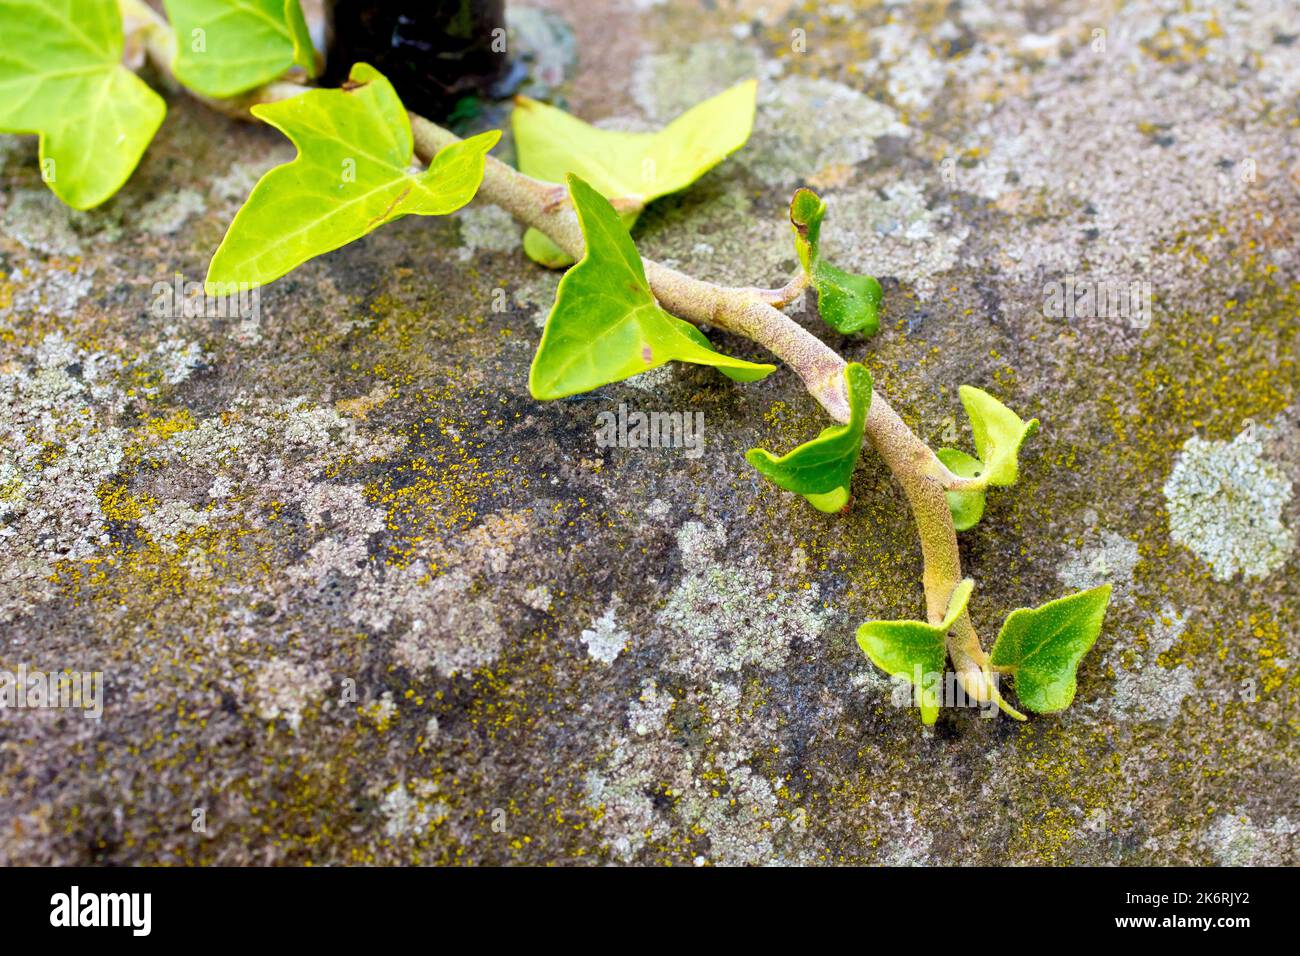 Ivy (hedera helix), close up showing the end of a tendril of the climbing plant reaching out over a lichen covered sandstone wall. Stock Photo